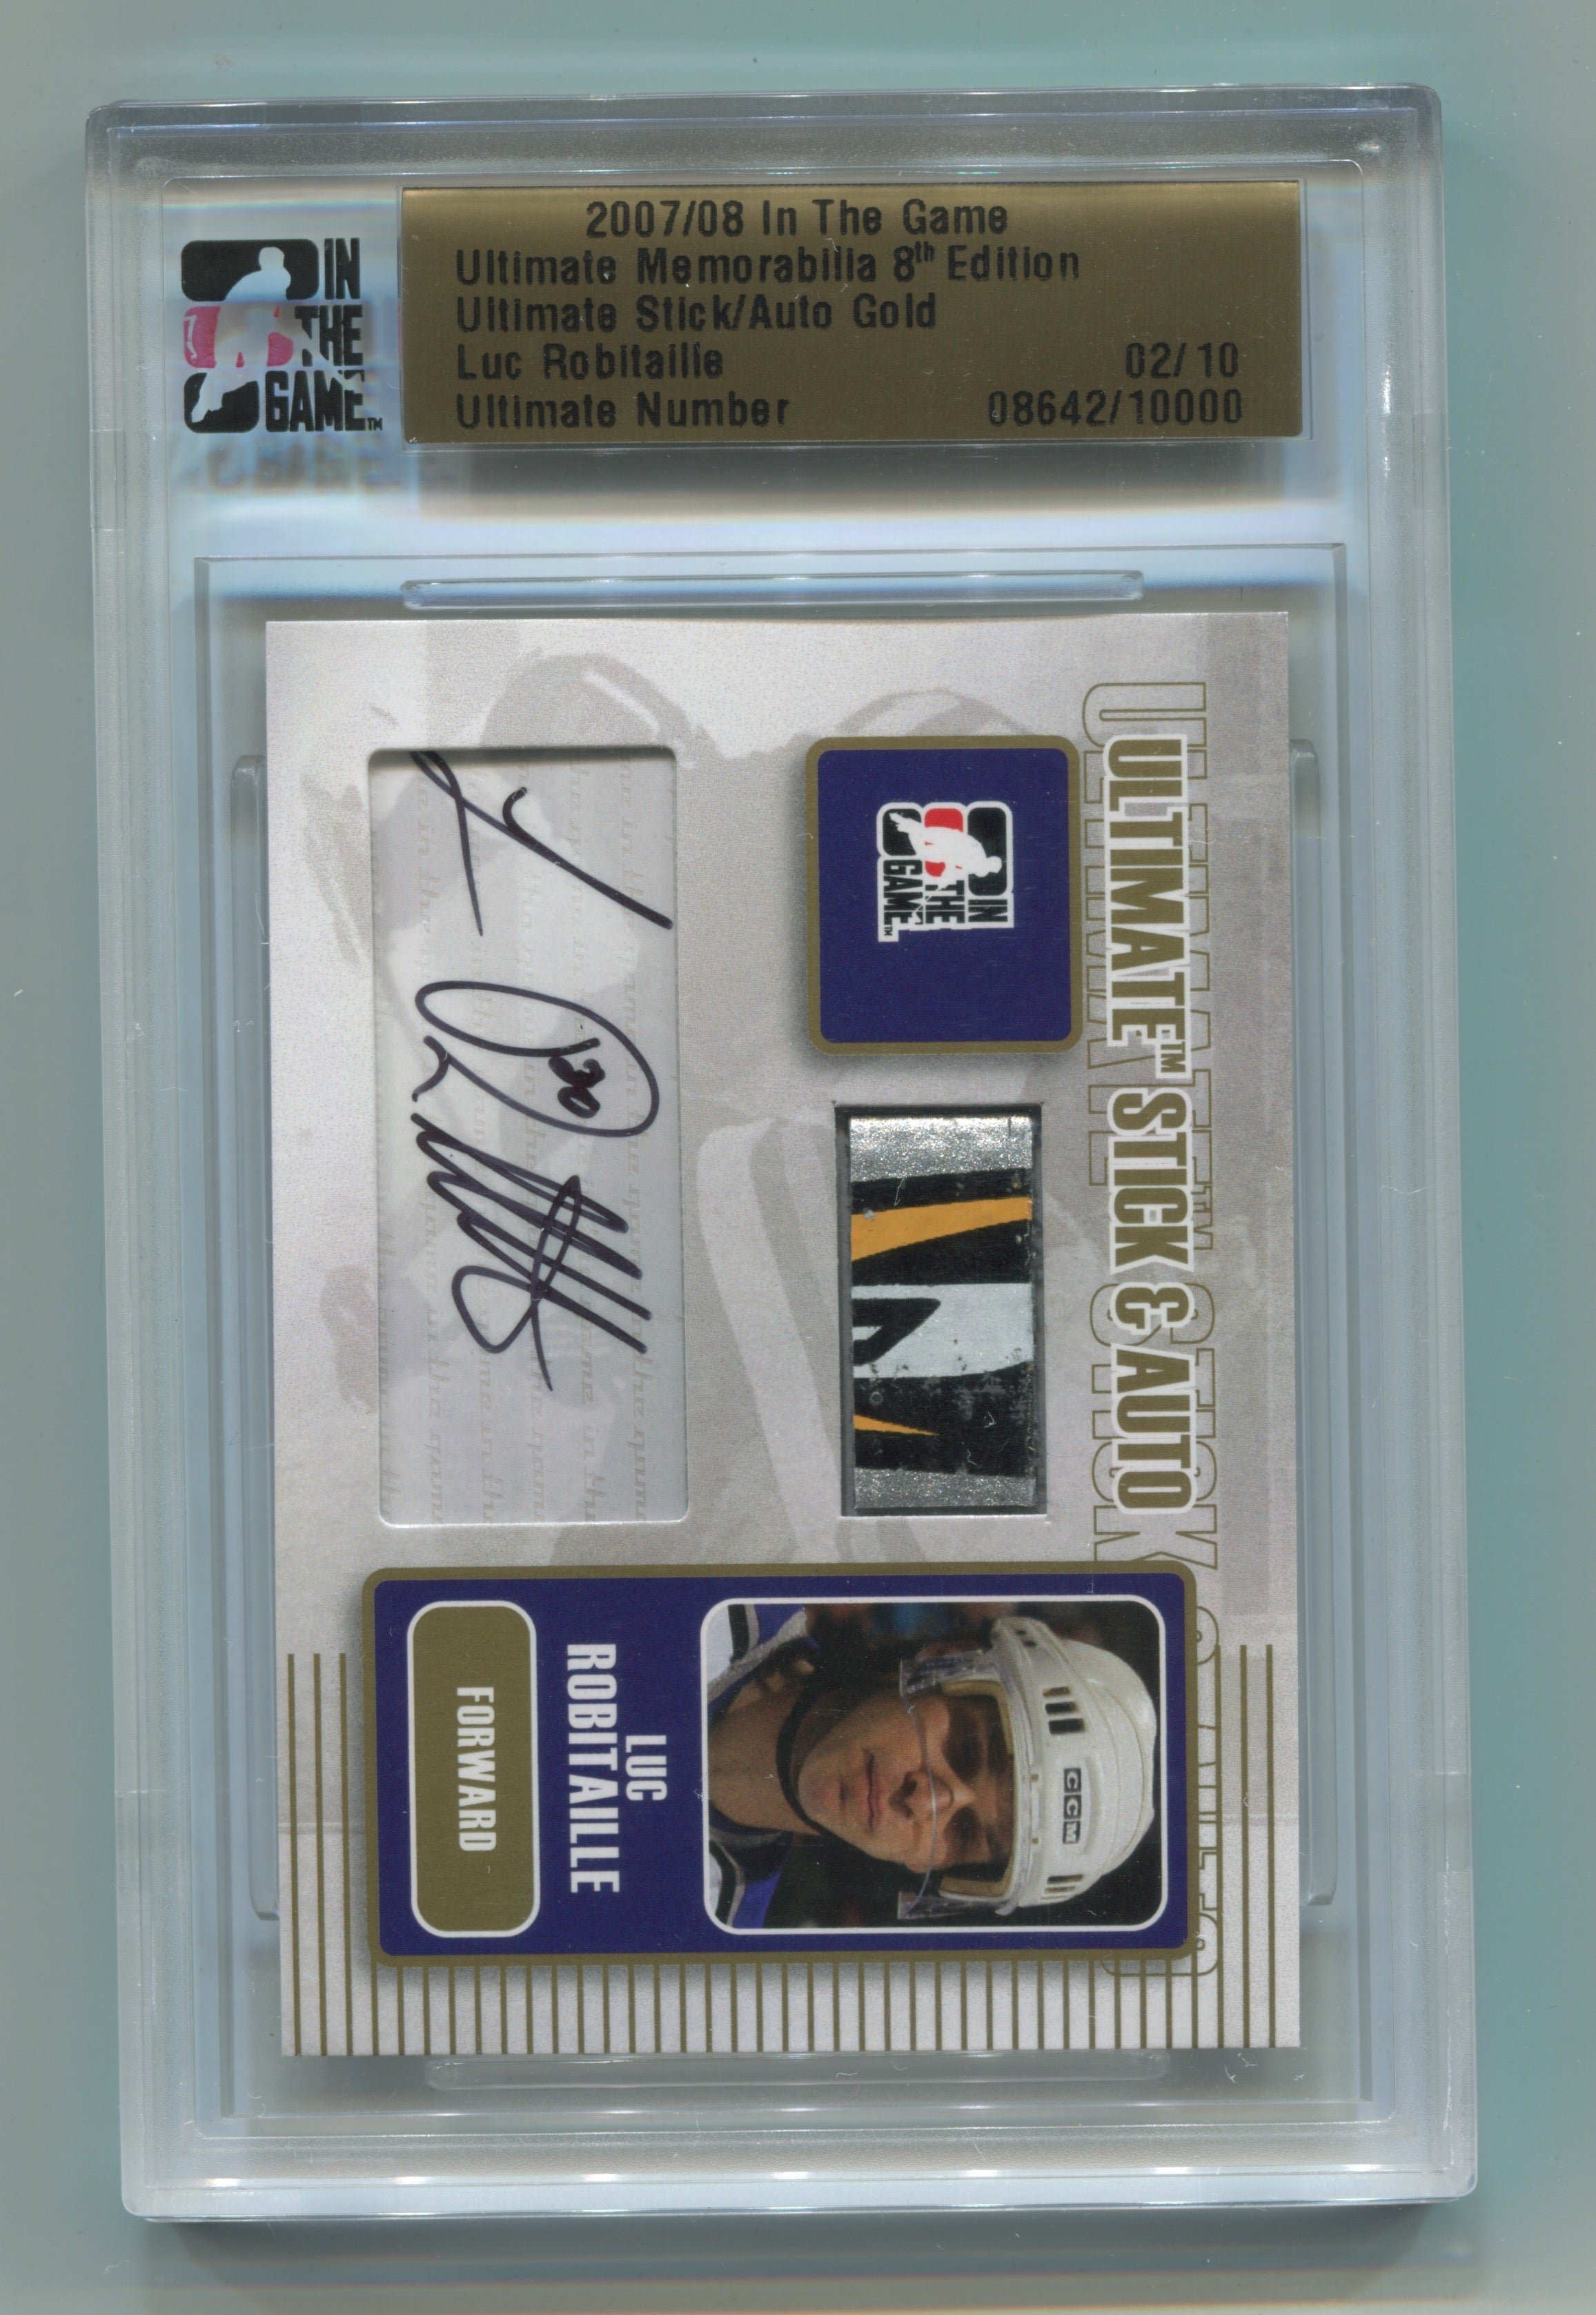 2007-08 ITG Ultimate Memorabilia 8th Edition Sticks Autos Gold #11 Luc Robitaille #02/10 | Eastridge Sports Cards